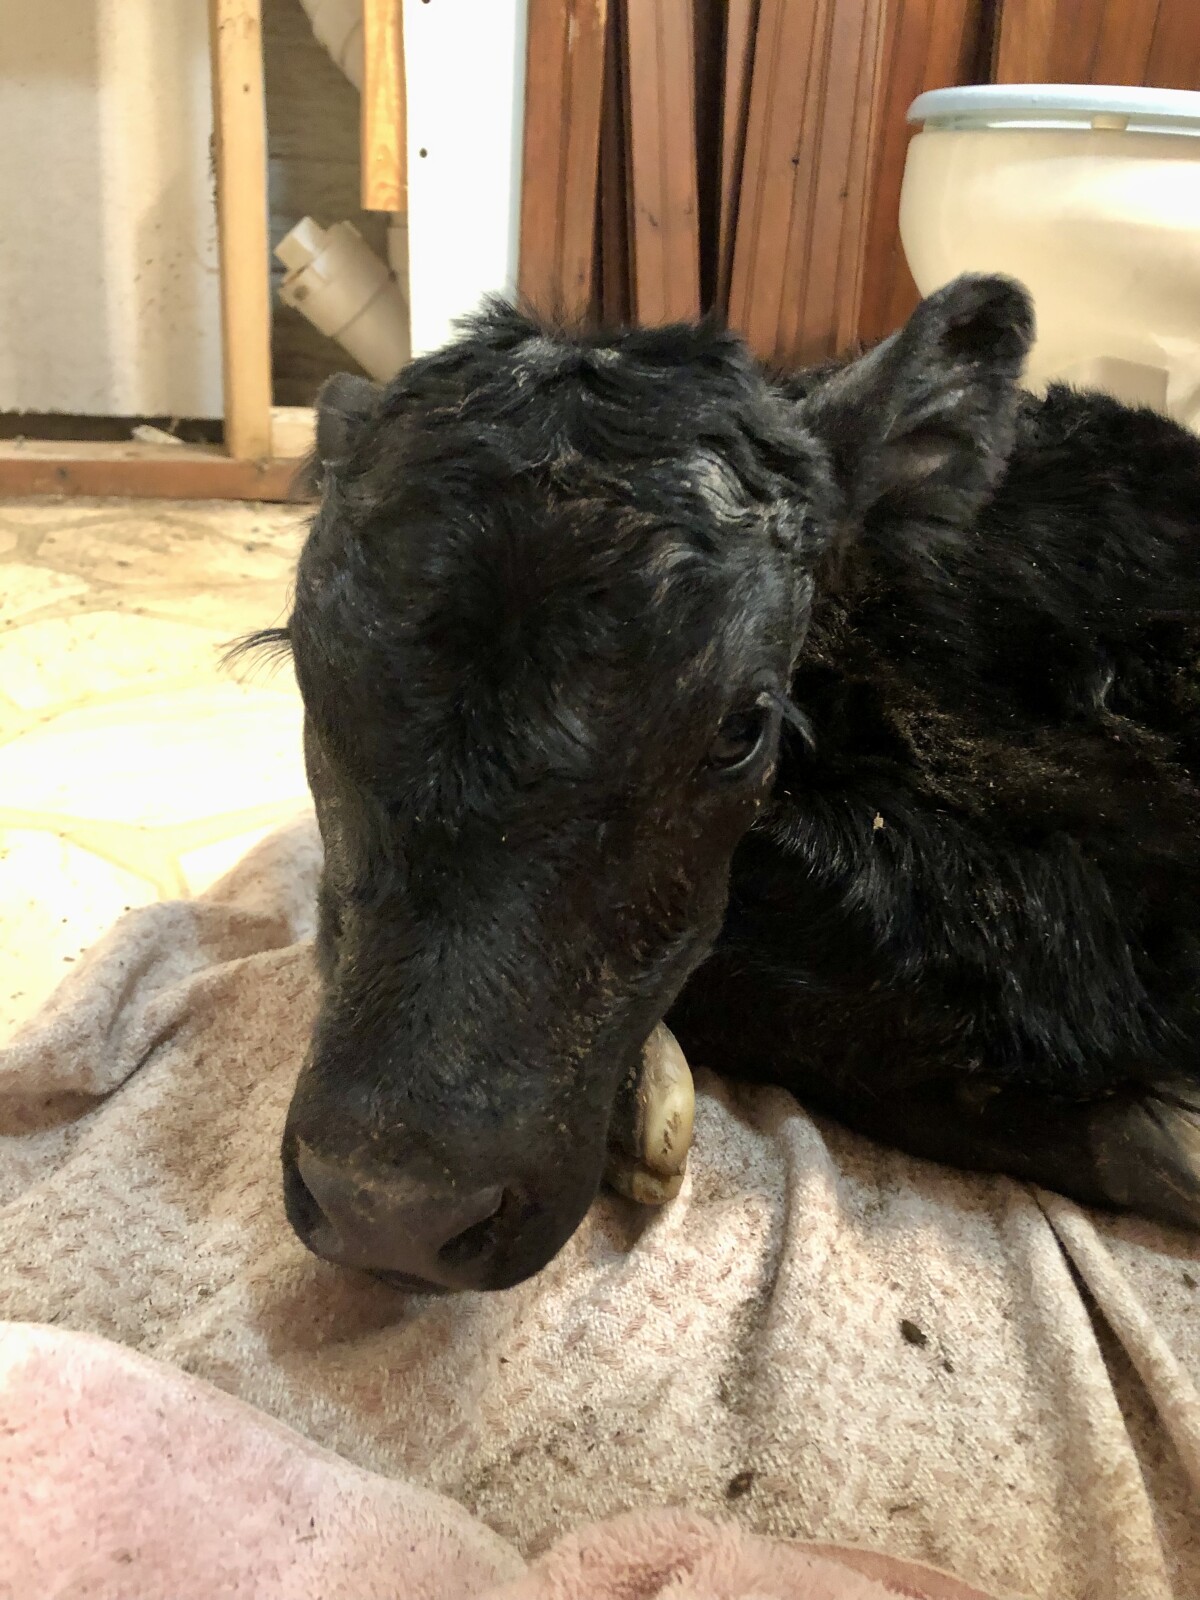 Everything You Need to Know About Caring for Bottle Calves